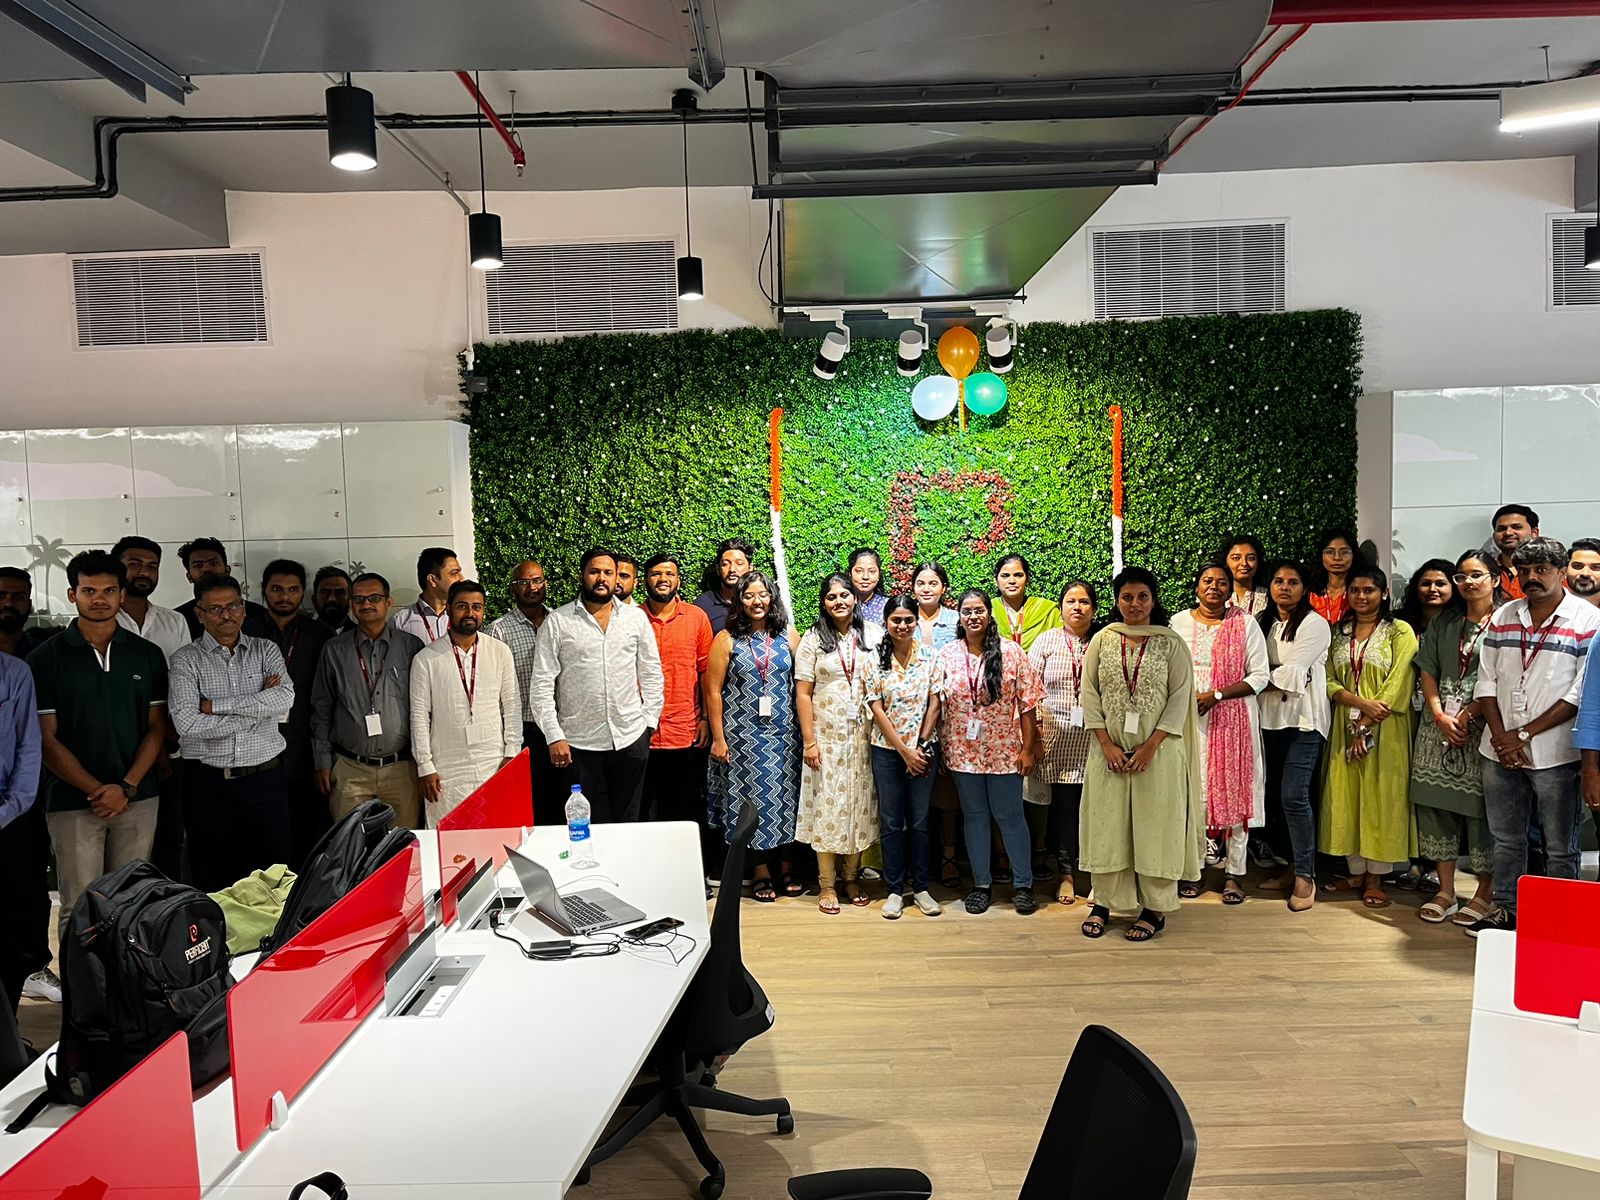 Celebrating India Independence Day at our workplace / Blogs / Perficient